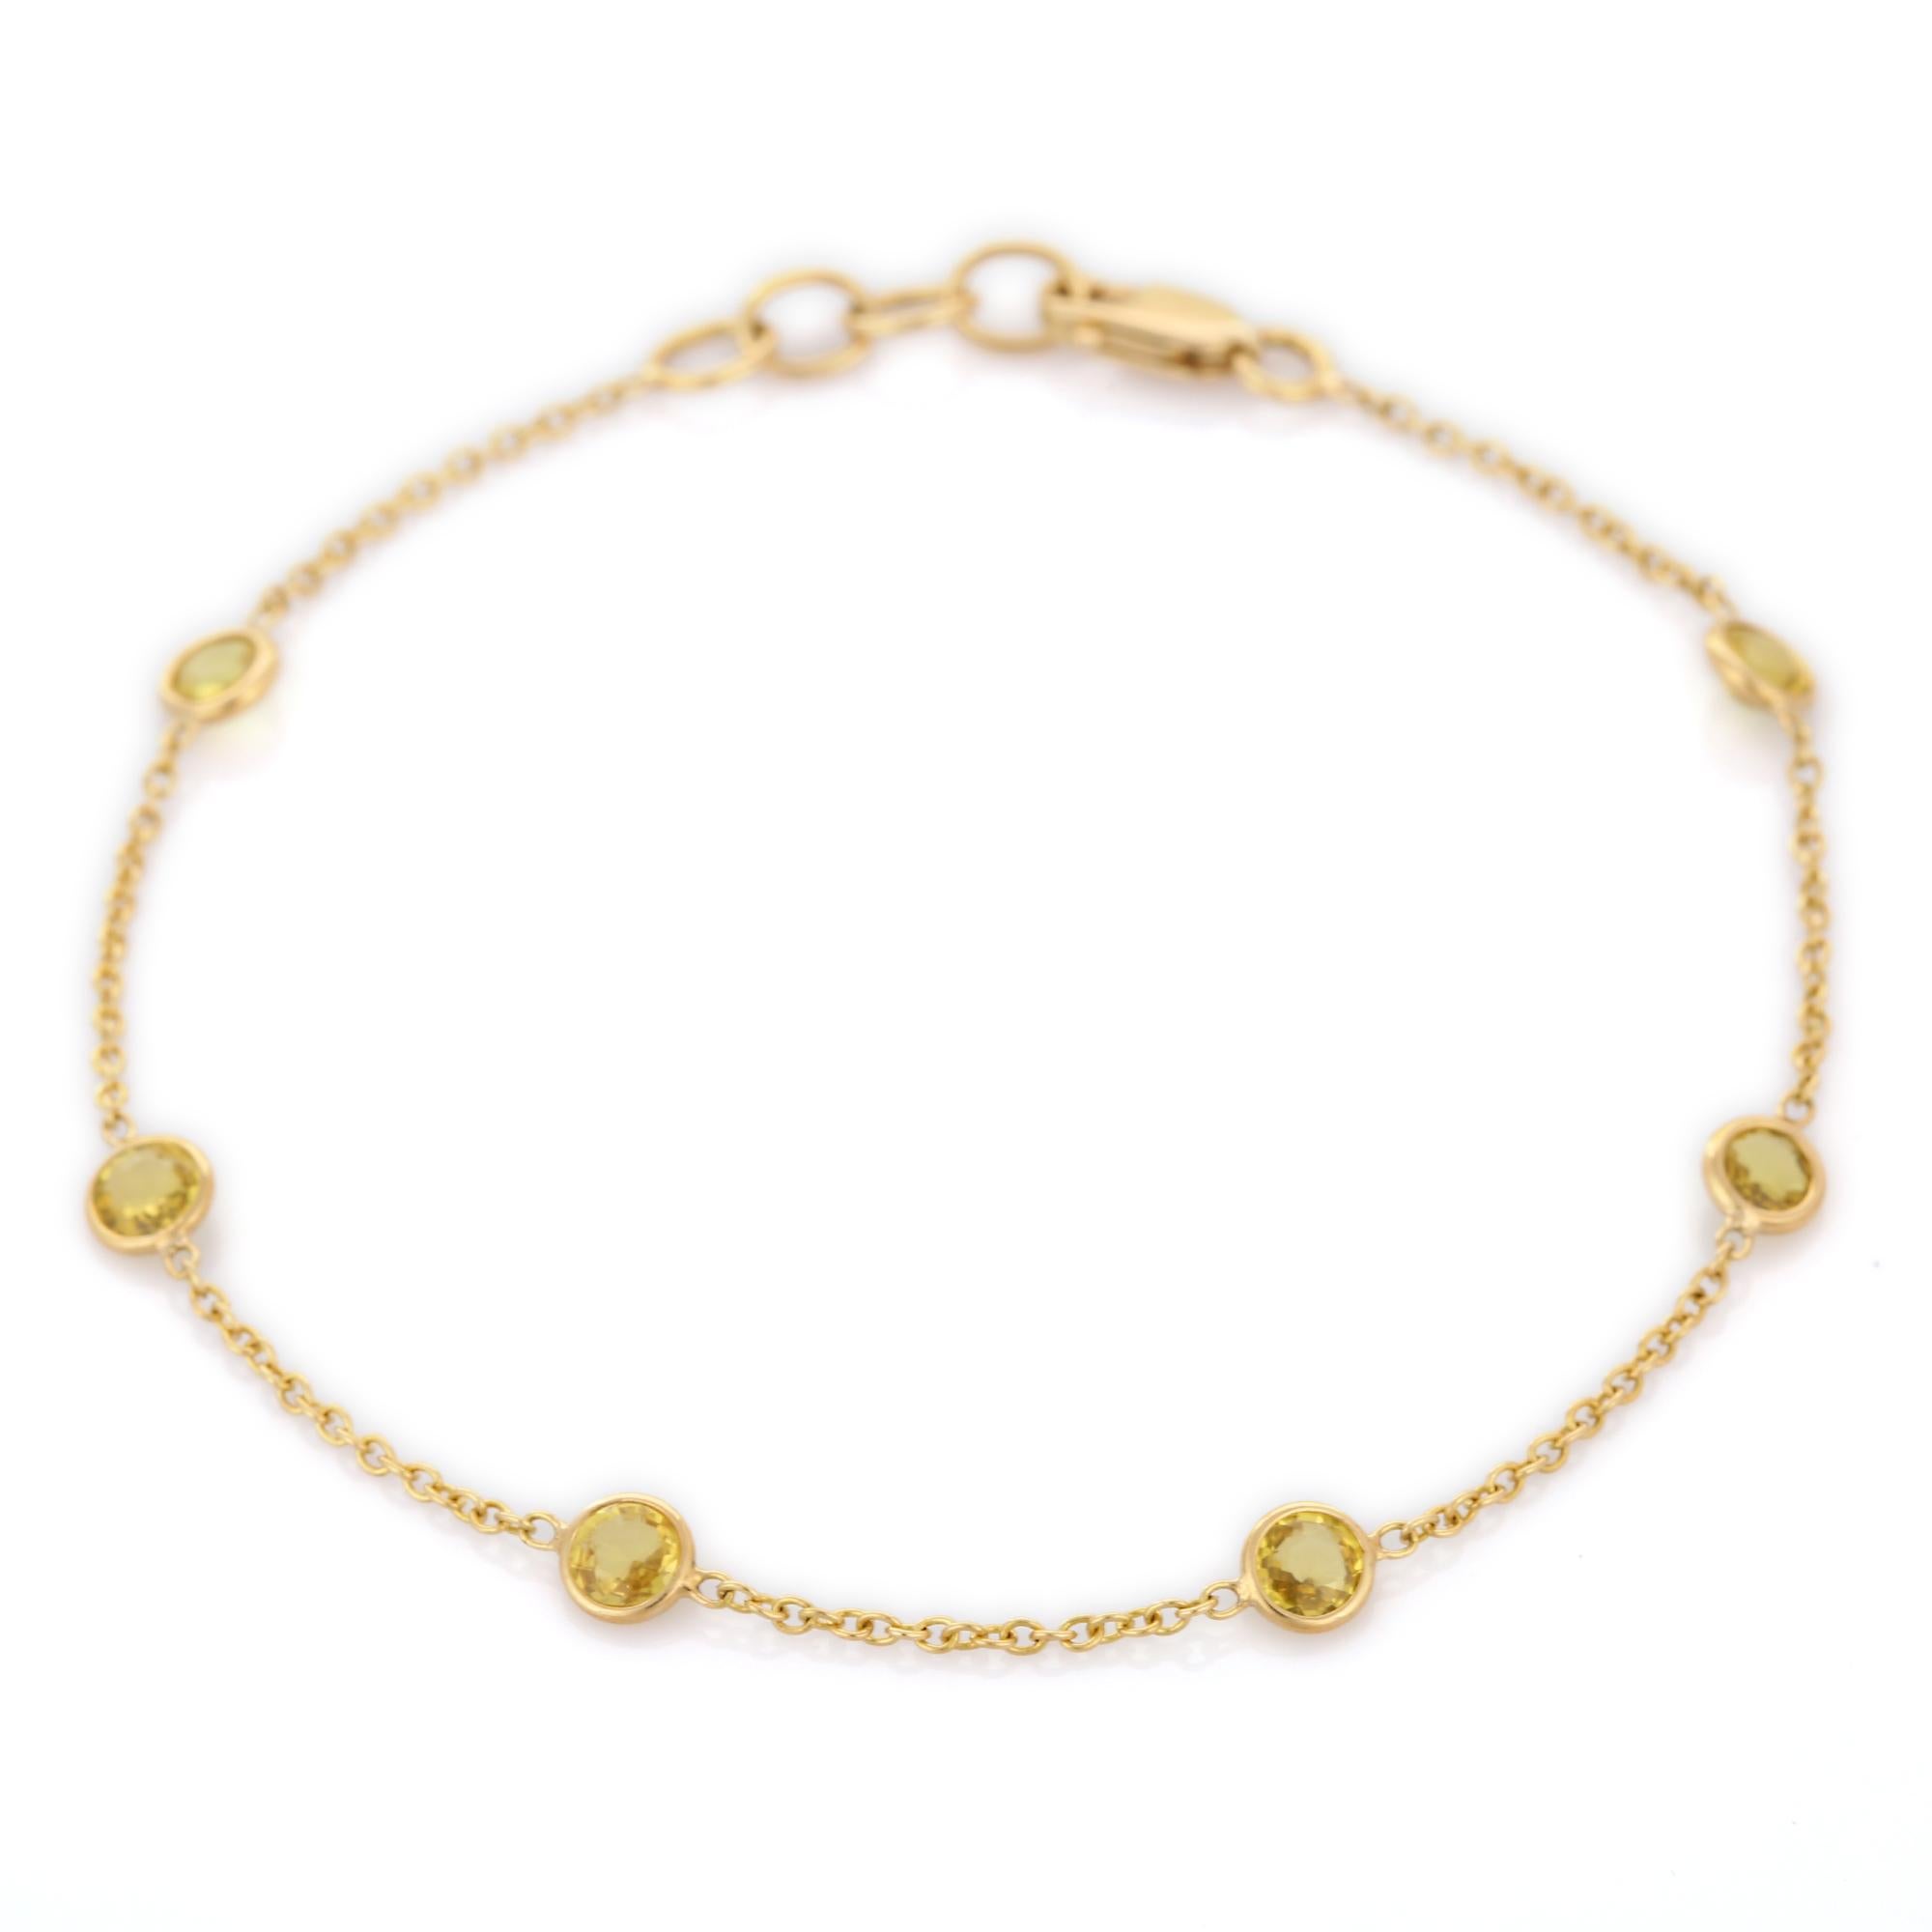 Women's Minimalist Round Cut Yellow Sapphire Chain Bracelet Mounted in 18K Yellow Gold For Sale